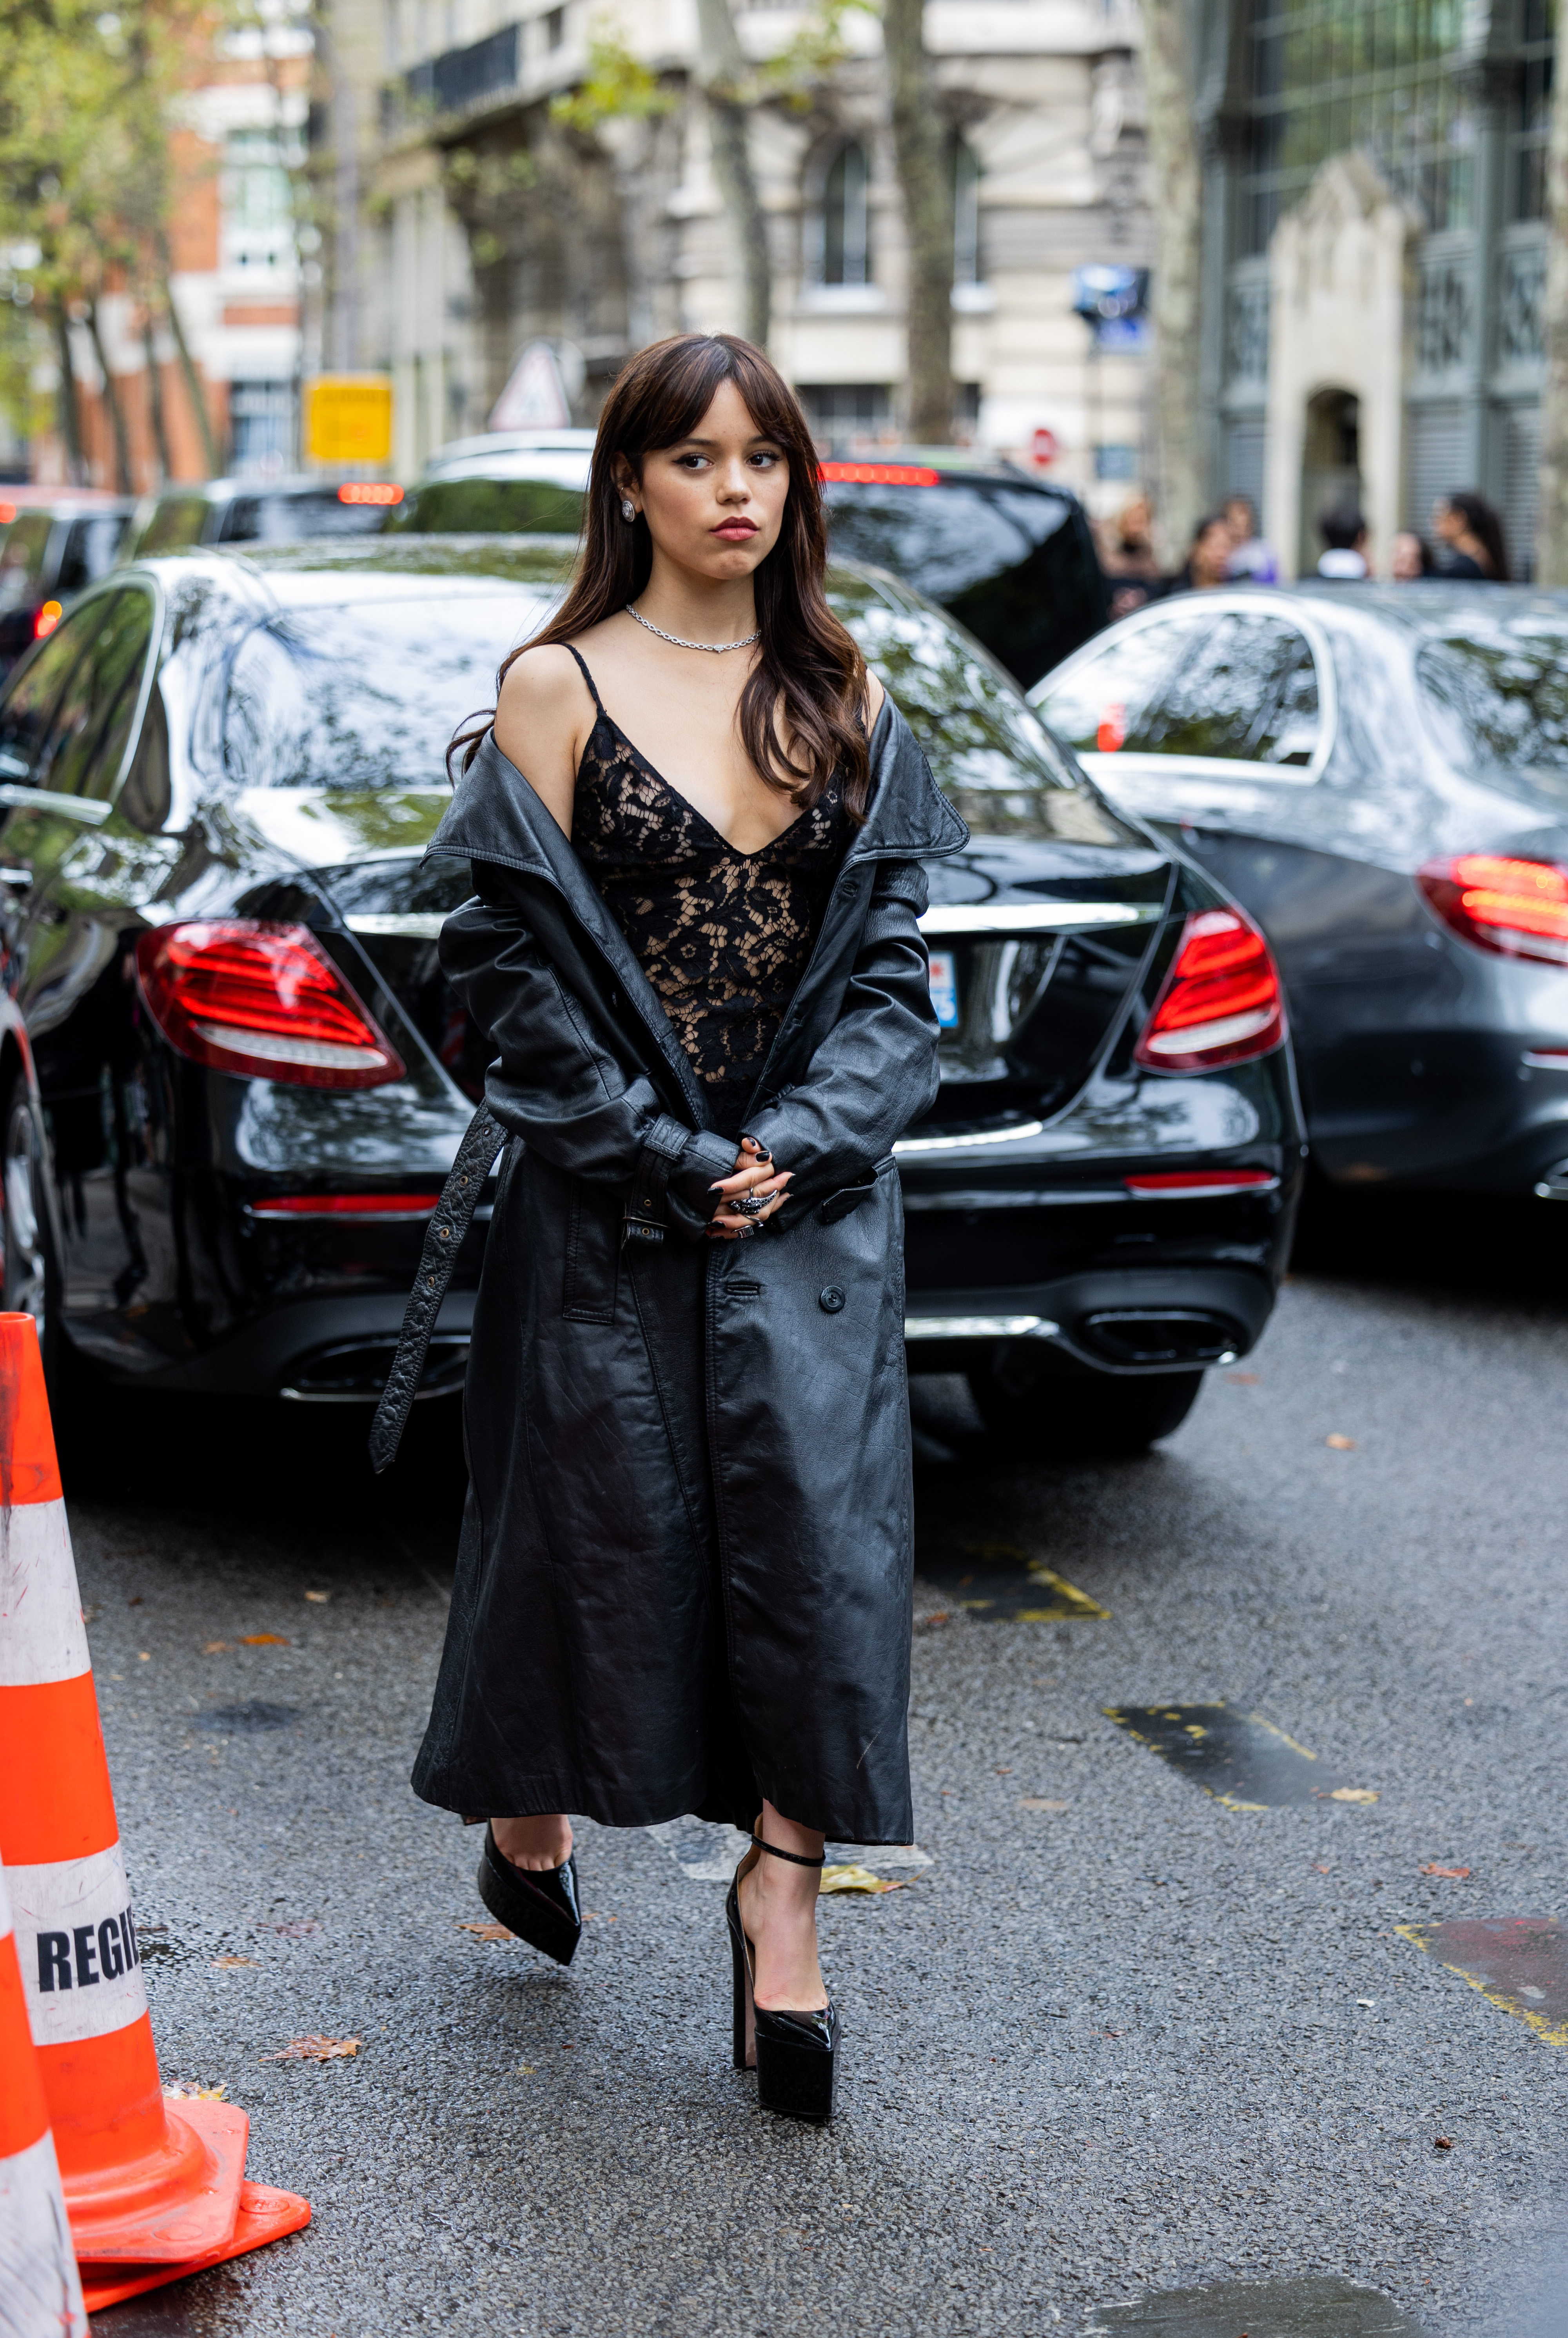 Wednesday Star Jenna Ortega Wore a Goth Sheer Dress and Corset